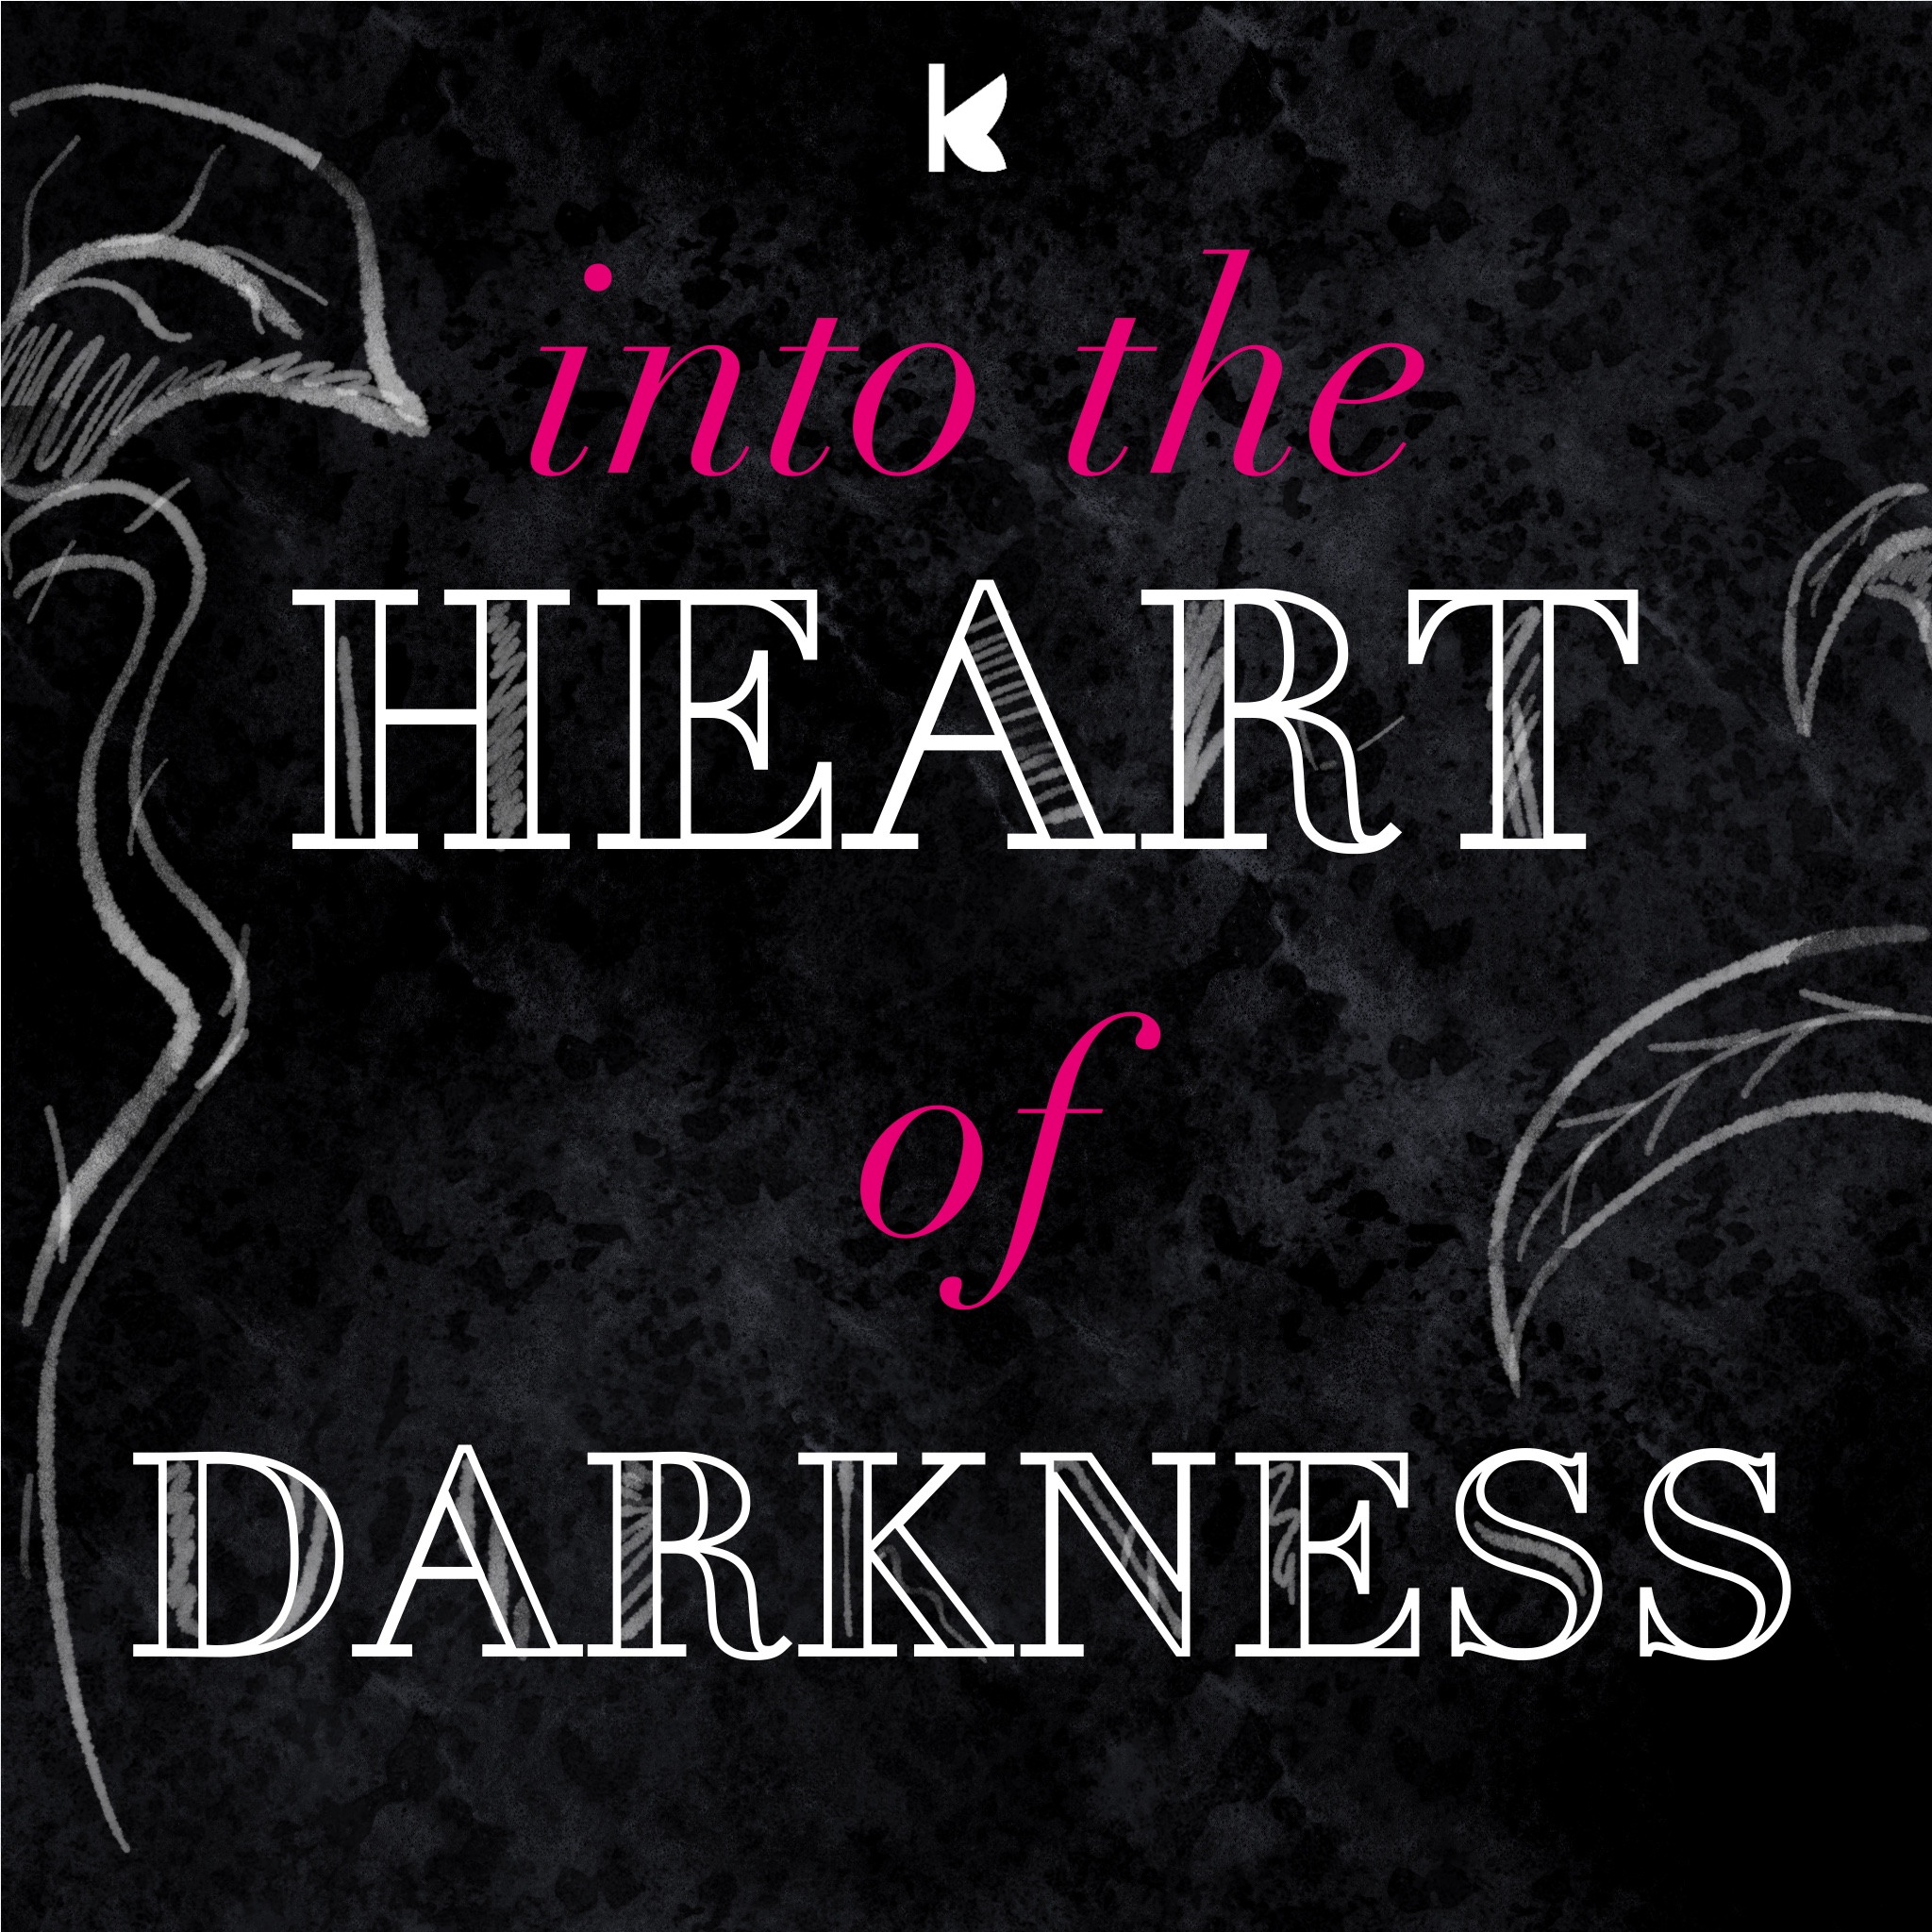 Into the heart of darkness